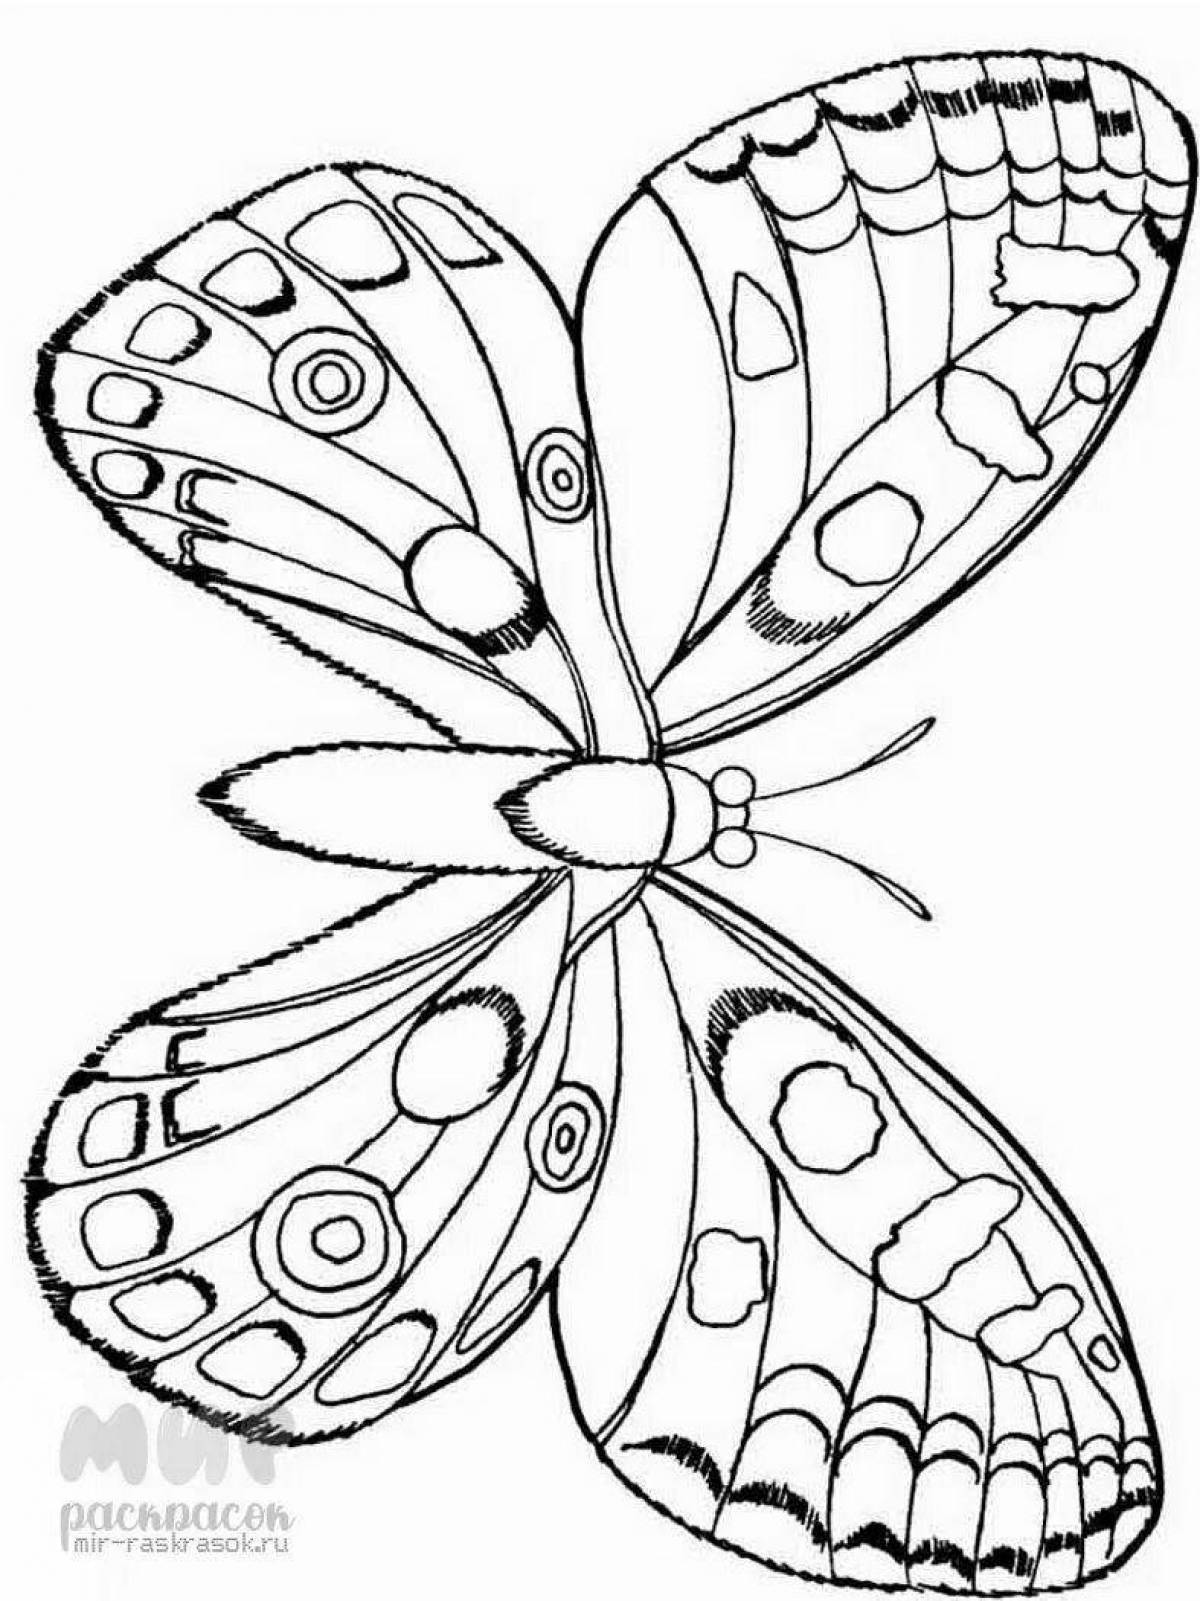 Apollo butterfly amazing coloring book